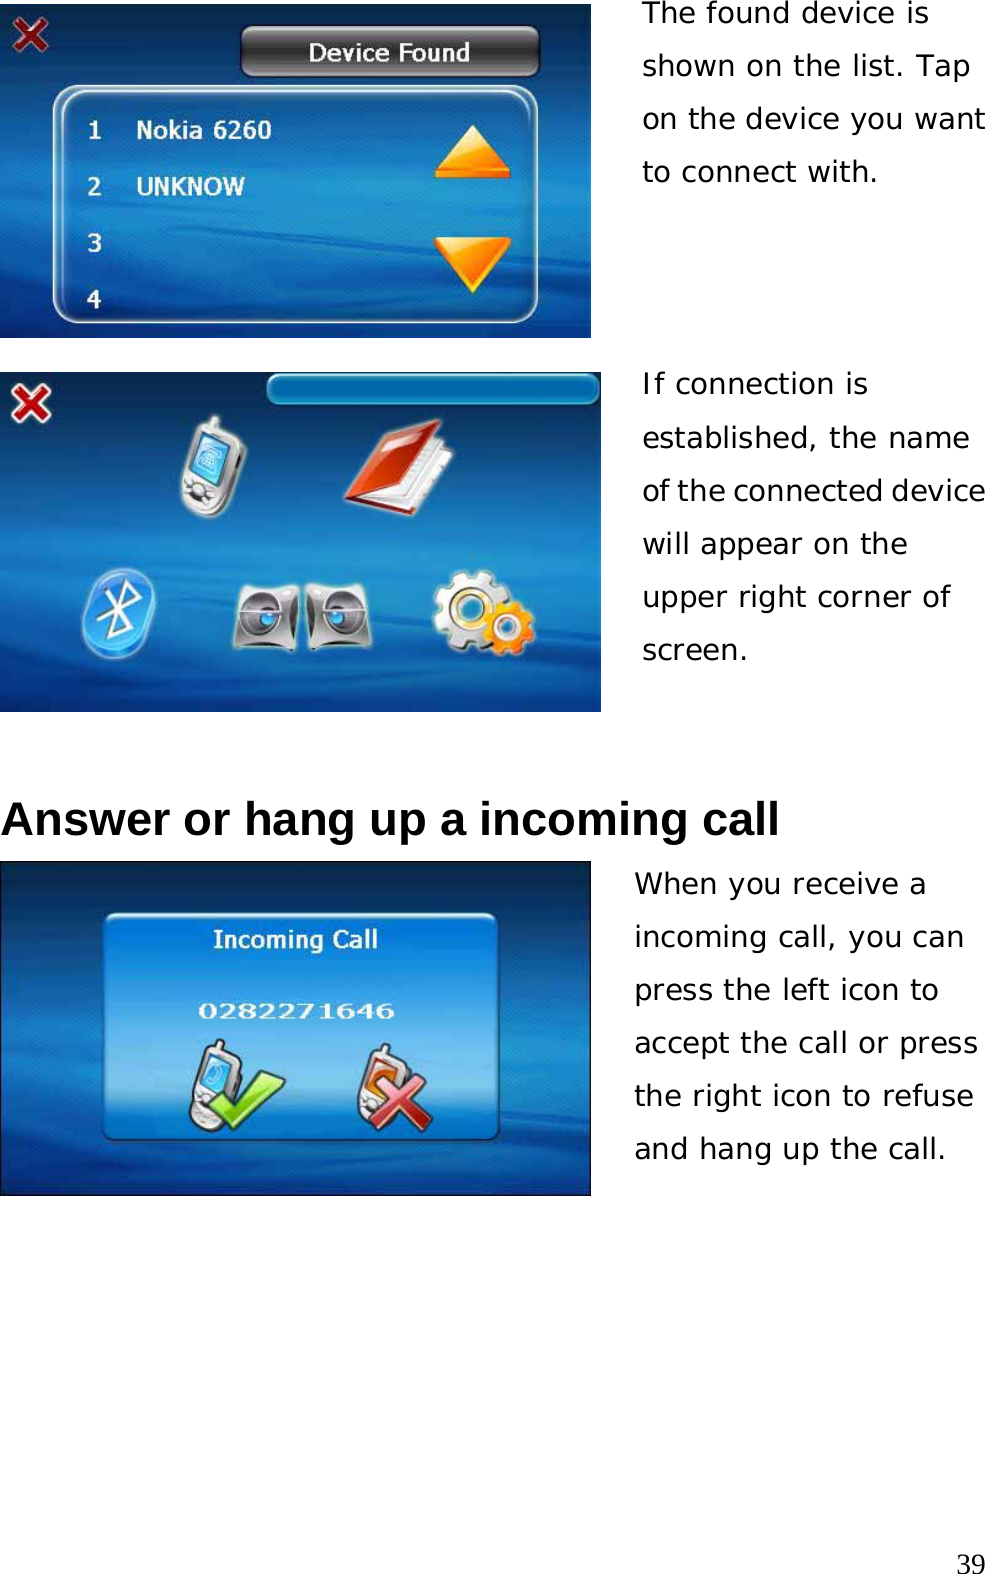  39 The found device is shown on the list. Tap on the device you want to connect with. If connection is established, the name of the connected device will appear on the upper right corner of screen.  Answer or hang up a incoming call When you receive a incoming call, you can press the left icon to accept the call or press the right icon to refuse and hang up the call.   